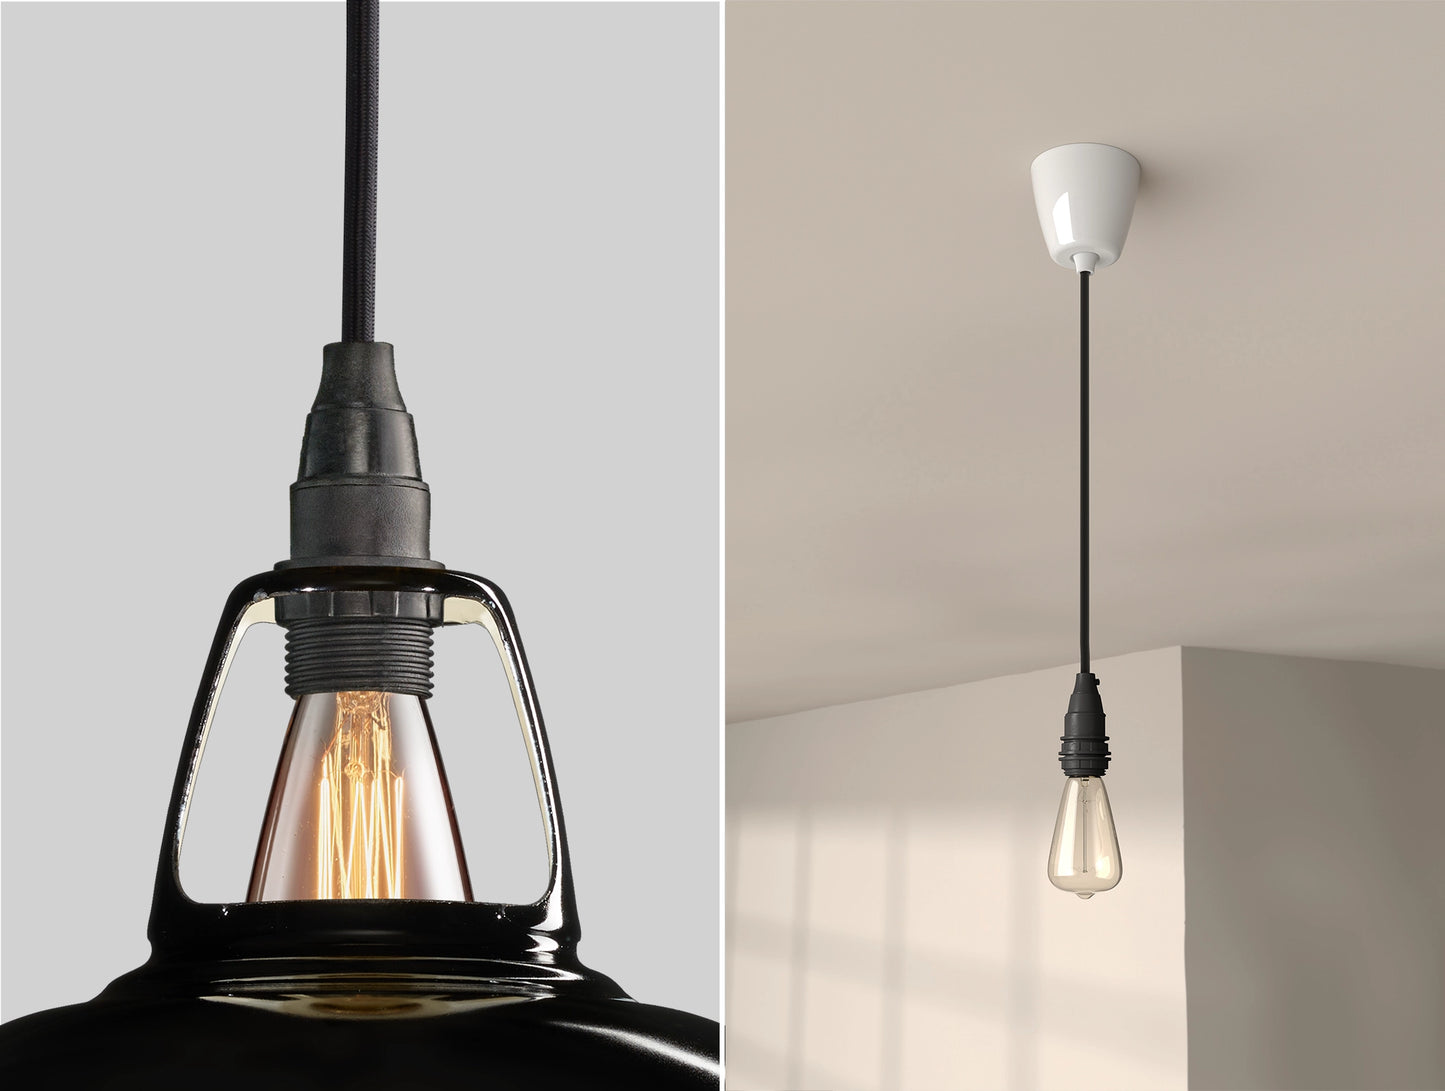 Close up of an E14 Industrial suspension set on a Jet Black lampshade on the left. On the right, an E14 Industrial pendant set with a lightbulb is hanging from the ceiling